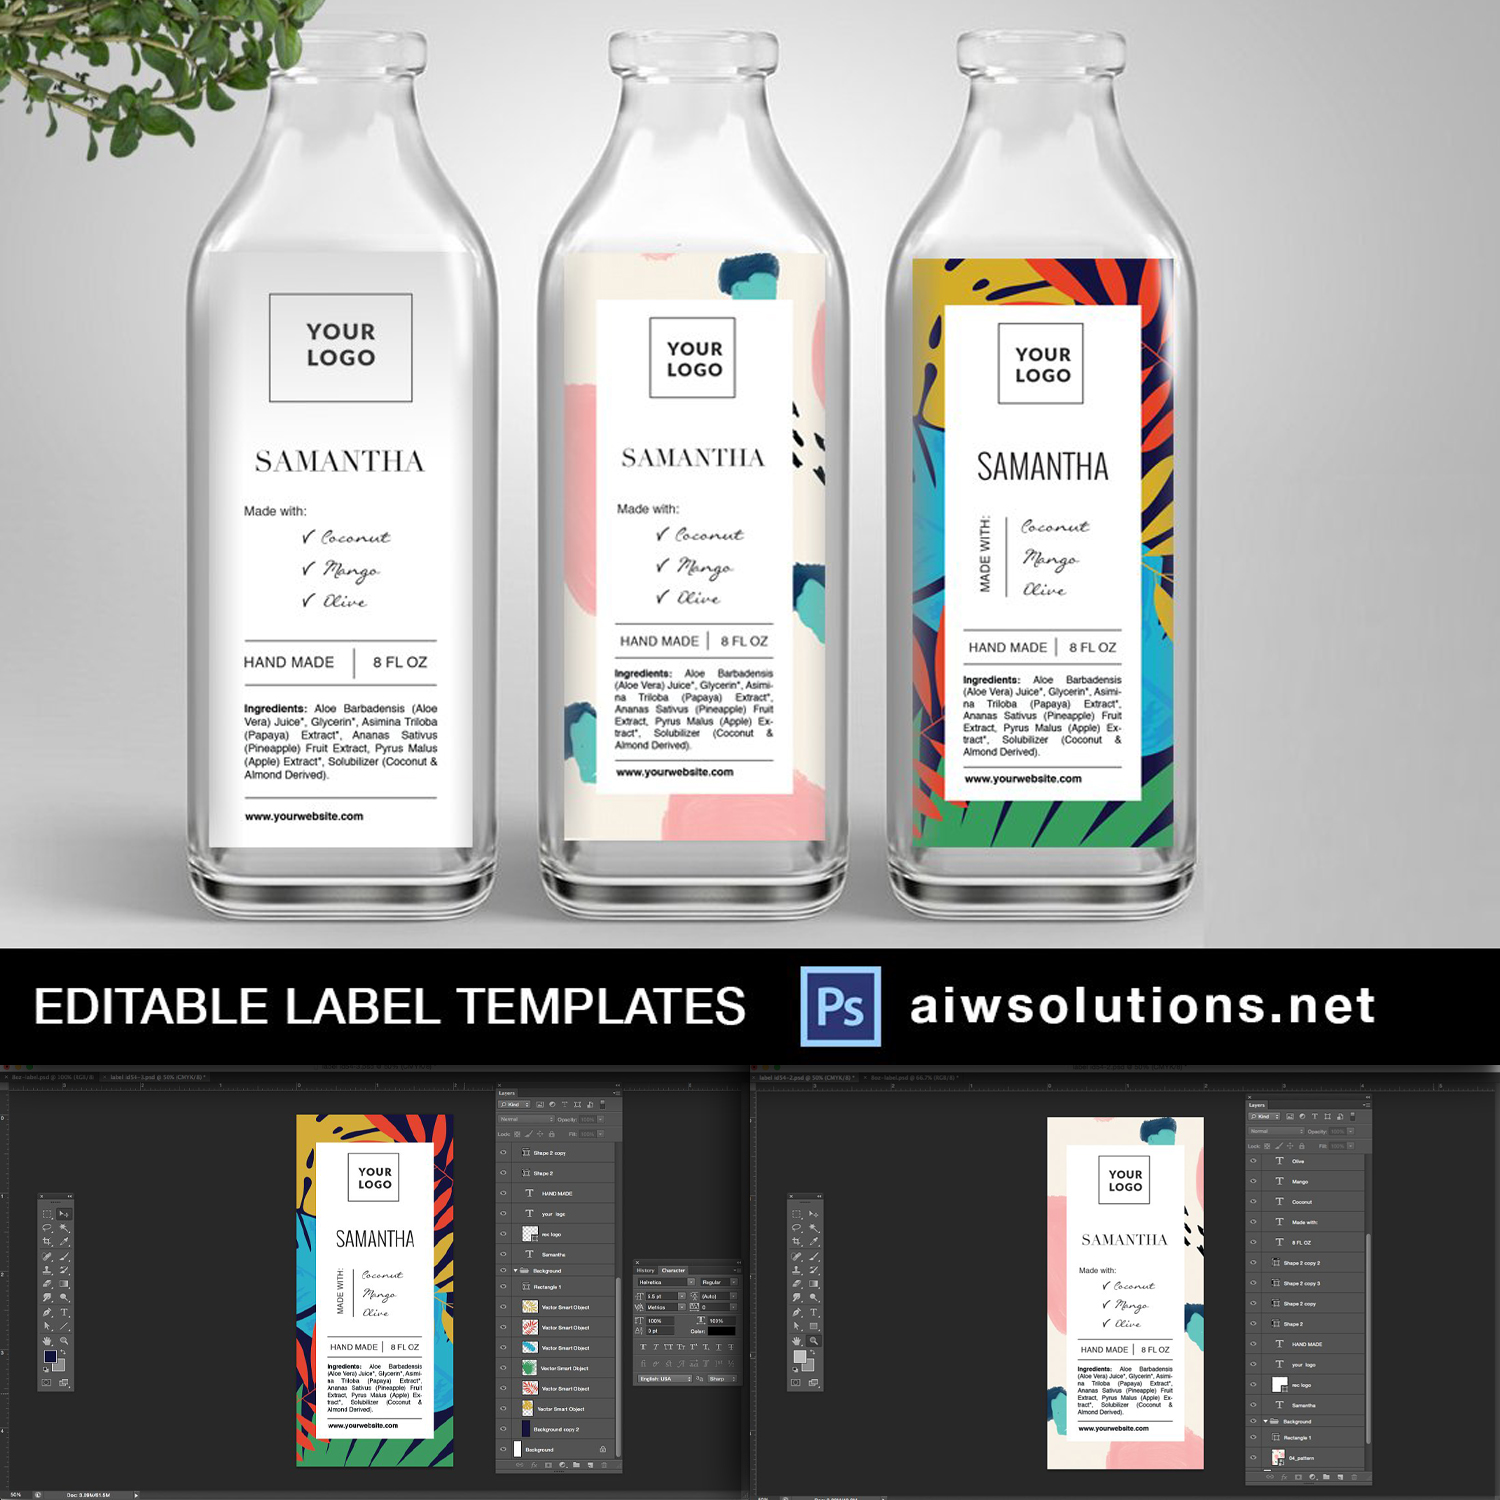 Prints of packaging and label template.